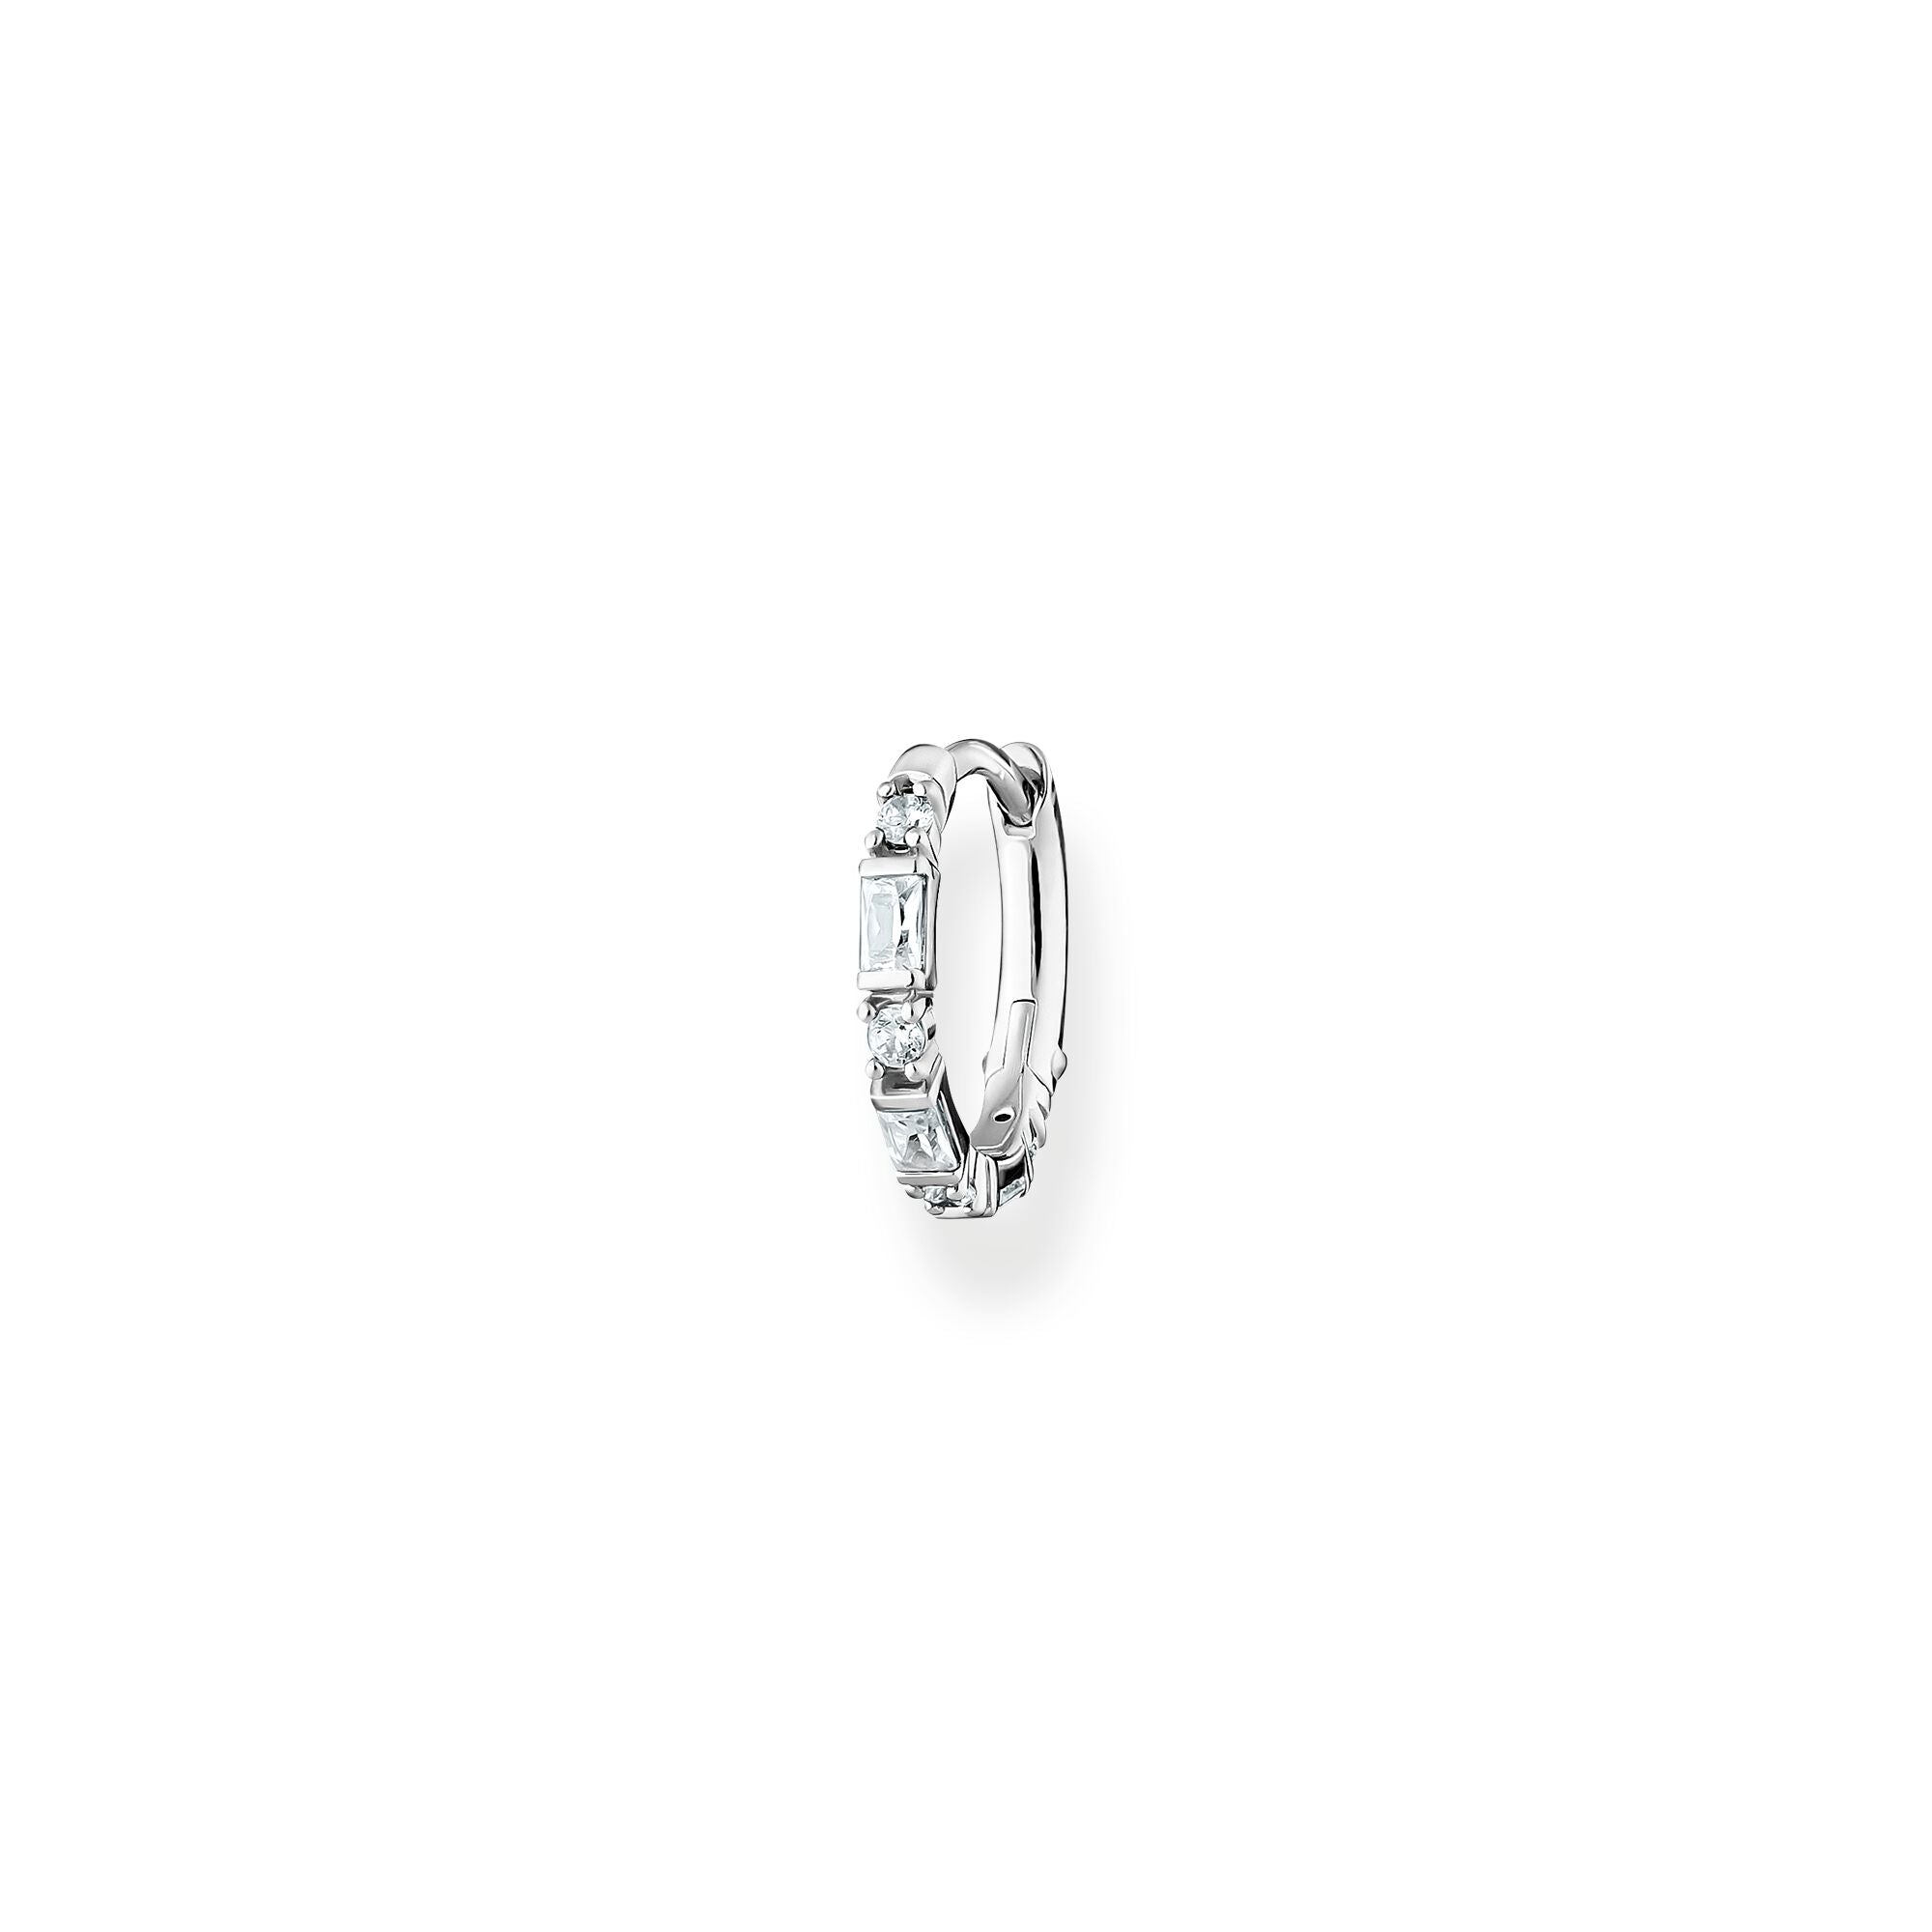 Thomas Sabo sterling silver and white baguette stones, clicker style single hoop earring